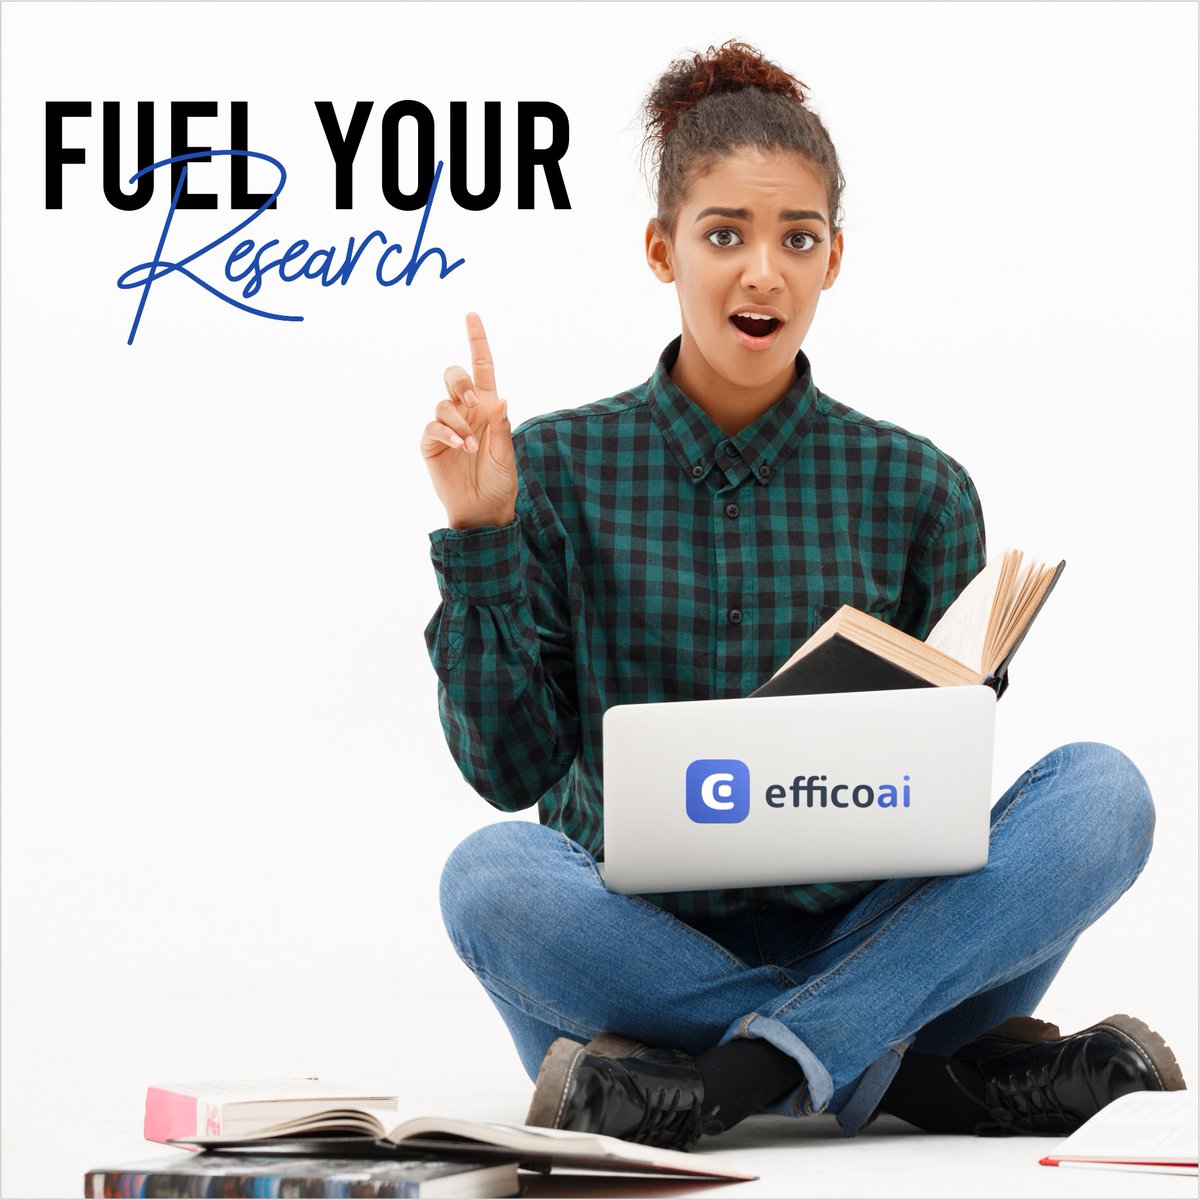 Effico AI: Your trusted study companion for research projects! Access a vast collection of articles, books, and resources to fuel your academic success. Join our waitlist and take your research to the next level! #EfficoAI #ResearchCompanion

#AcademicSuccess #ResearchProjects